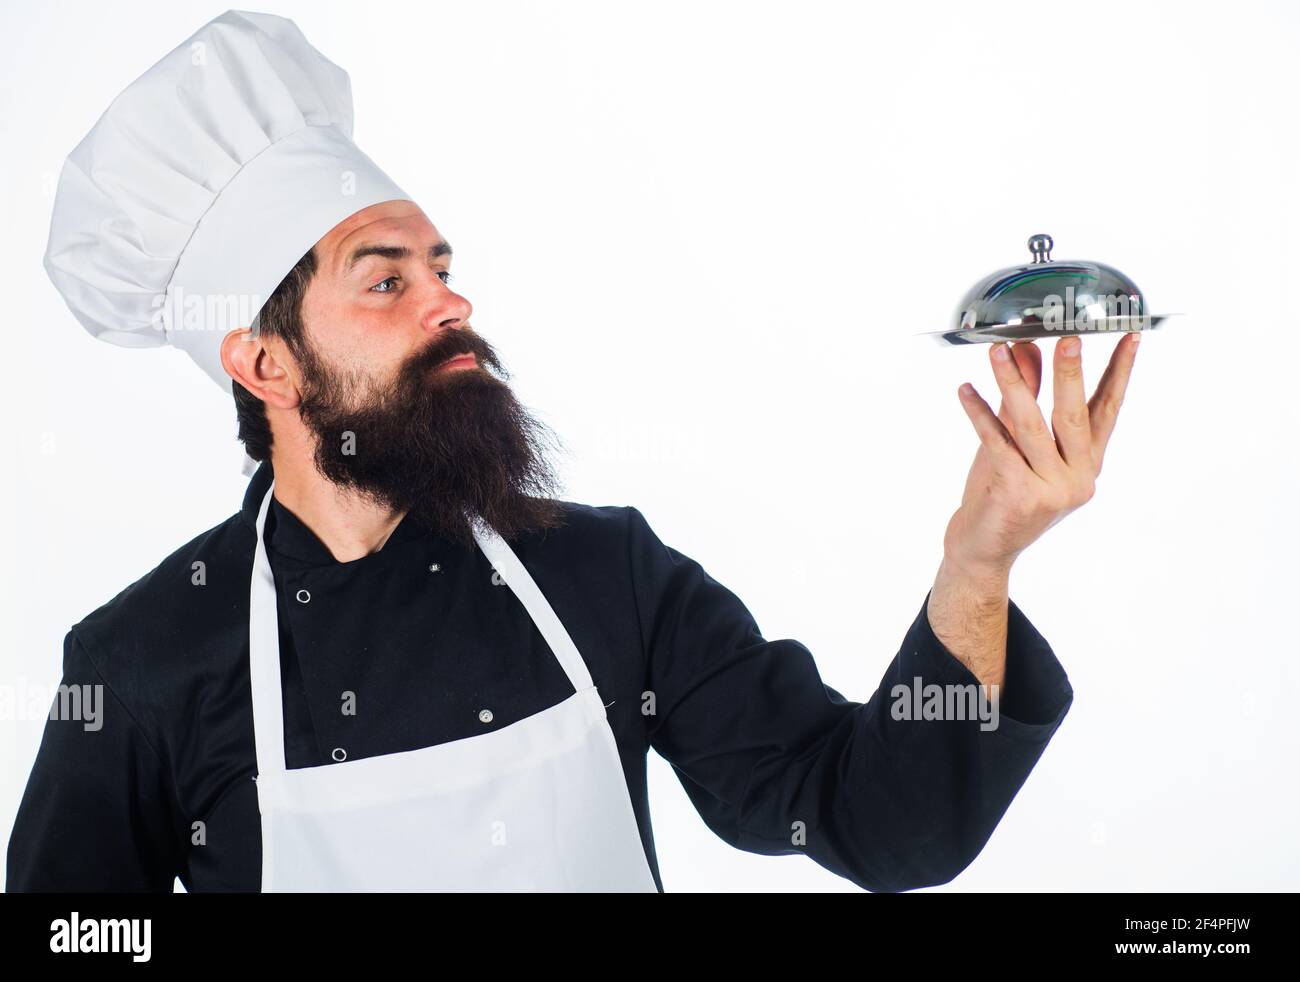 Restaurant Serving and presentation. Bearded chef with food tray. Cook holds metallic dish. Stock Photo